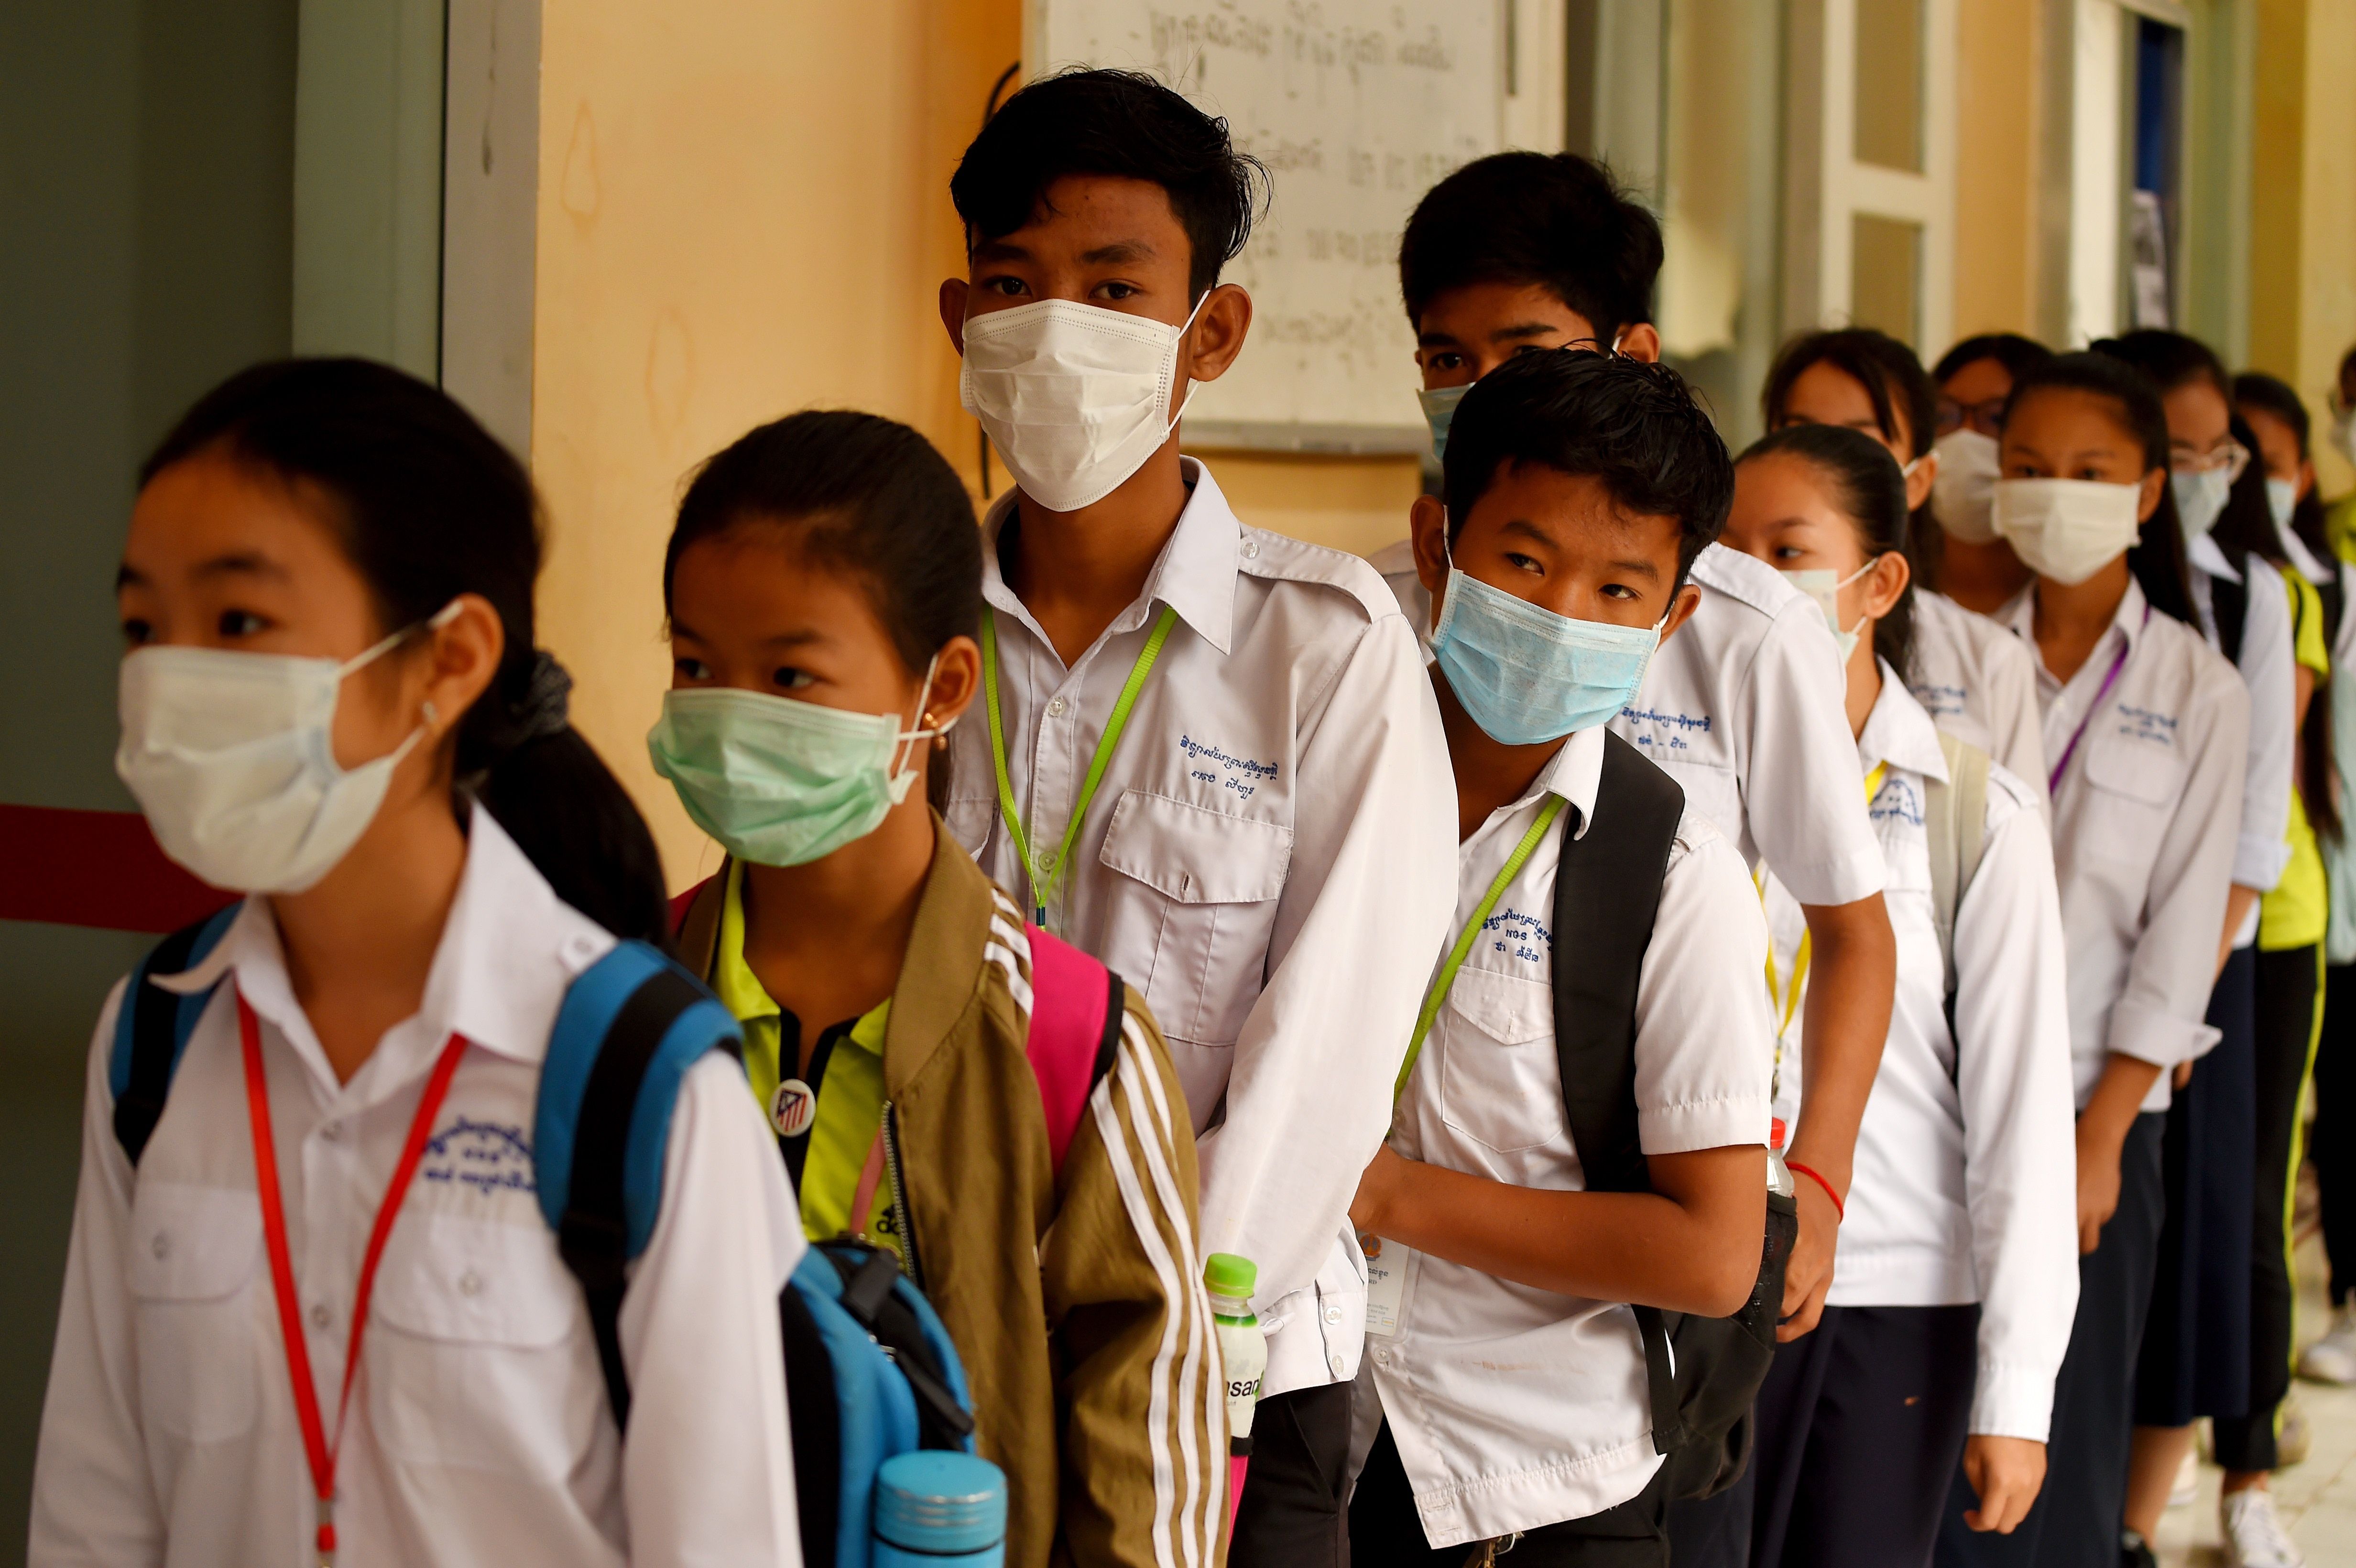 Students line up to disinfect their hands before entering class in Phnom Penh, Cambodia, on January 28, 2020.